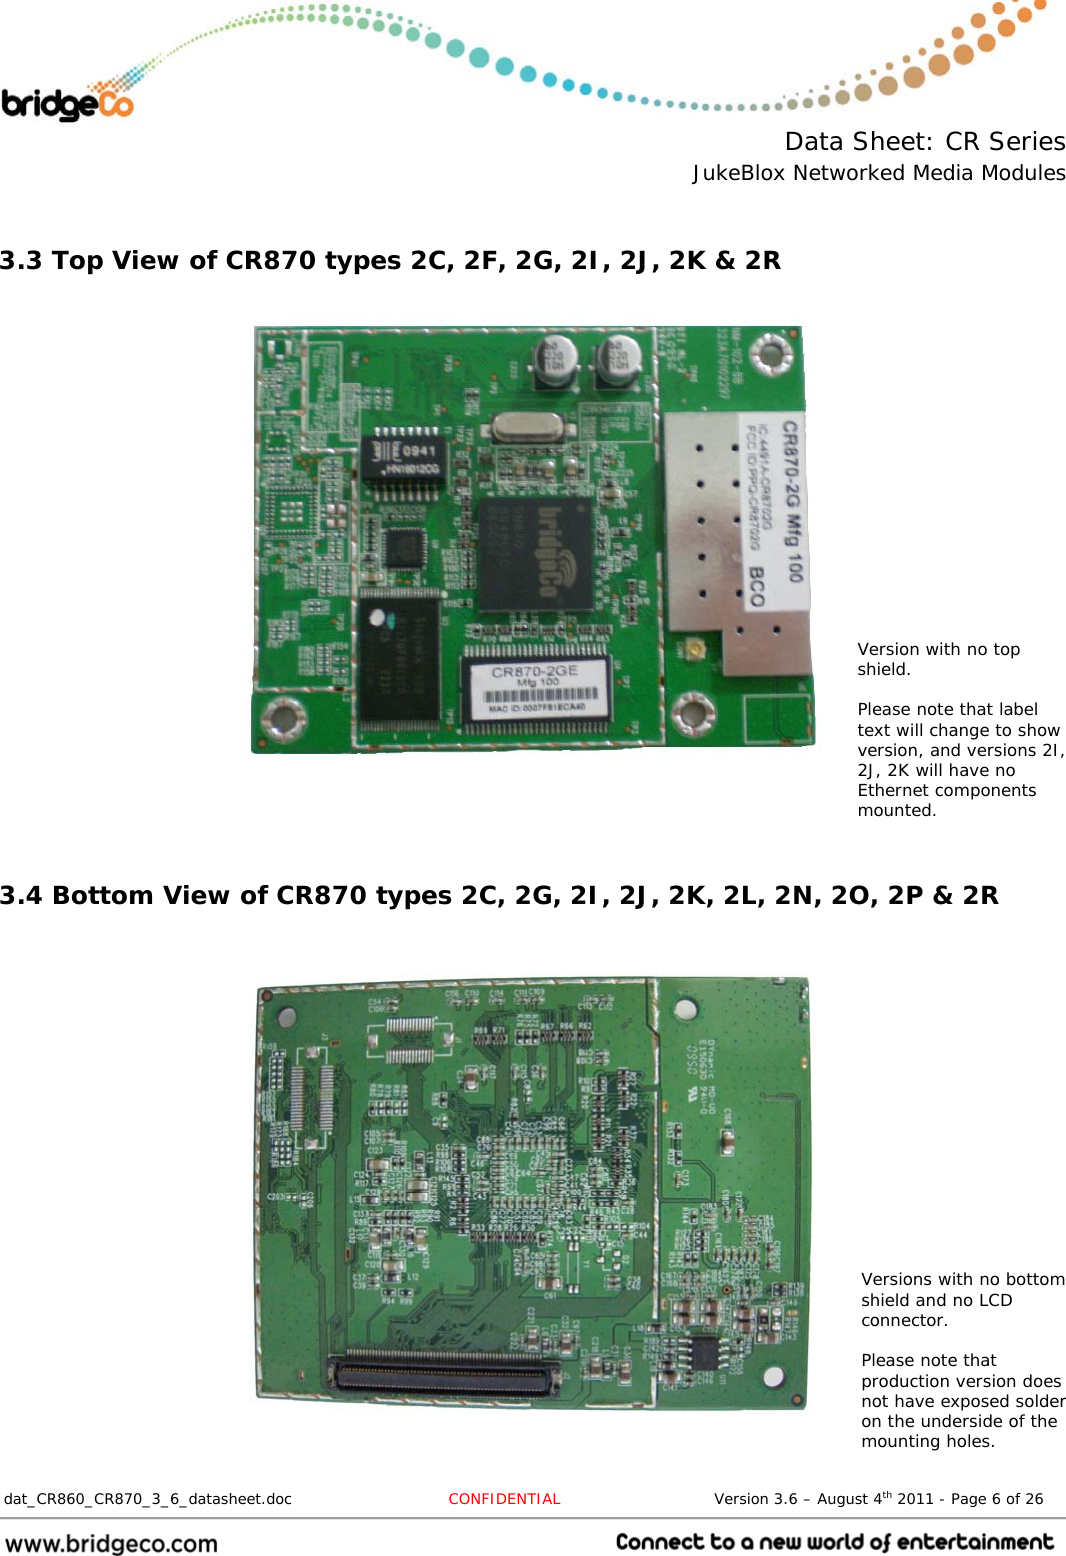  Data Sheet: CR Series JukeBlox Networked Media Modules  dat_CR860_CR870_3_6_datasheet.doc  CONFIDENTIAL                              Version 3.6 – August 4th 2011 - Page 6 of 26                                  3.3 Top View of CR870 types 2C, 2F, 2G, 2I, 2J, 2K &amp; 2R            3.4 Bottom View of CR870 types 2C, 2G, 2I, 2J, 2K, 2L, 2N, 2O, 2P &amp; 2R      Versions with no bottom shield and no LCD connector.  Please note that production version does not have exposed solder on the underside of the mounting holes. Version with no top shield.  Please note that label text will change to show version, and versions 2I, 2J, 2K will have no Ethernet components mounted. 